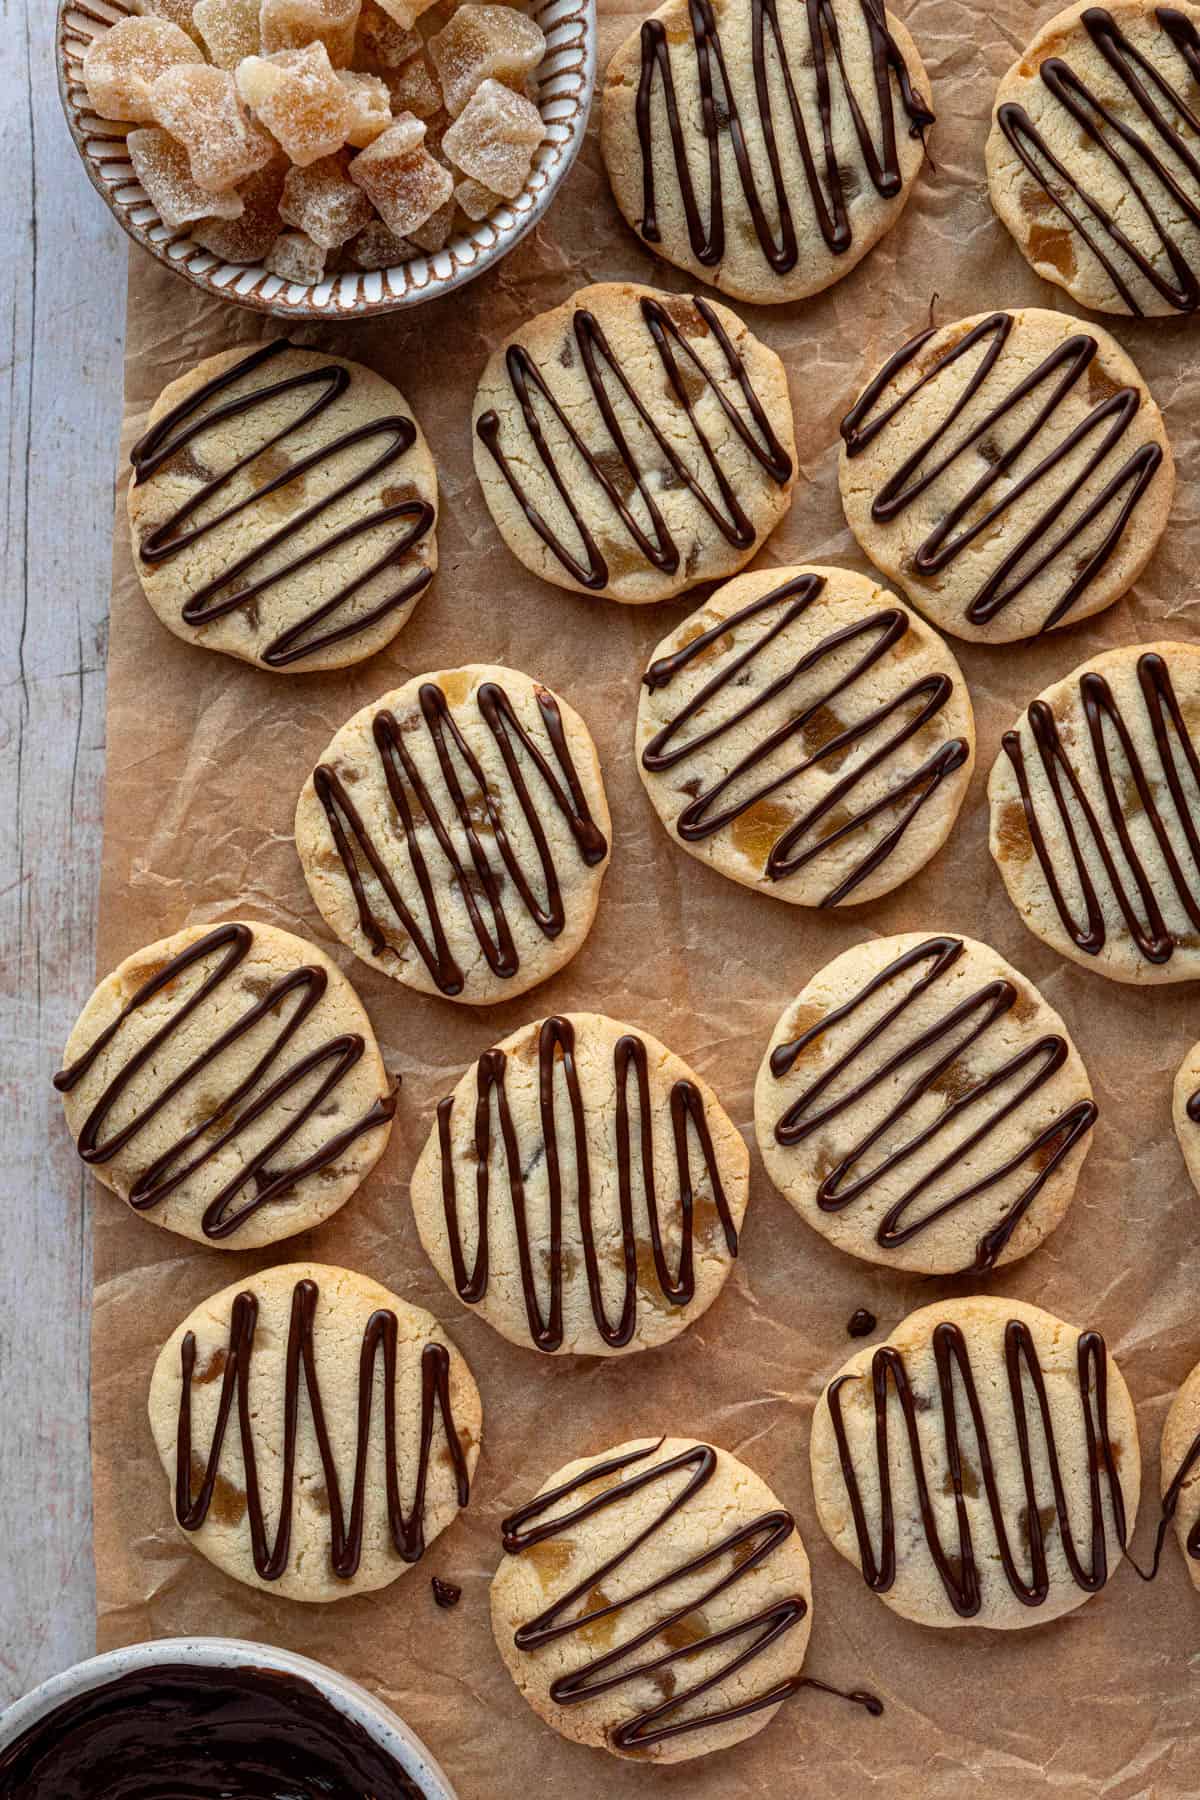 Ginger shortbread cookies on a sheet of brown baking parchment with bowls of candied ginger and chocolate.